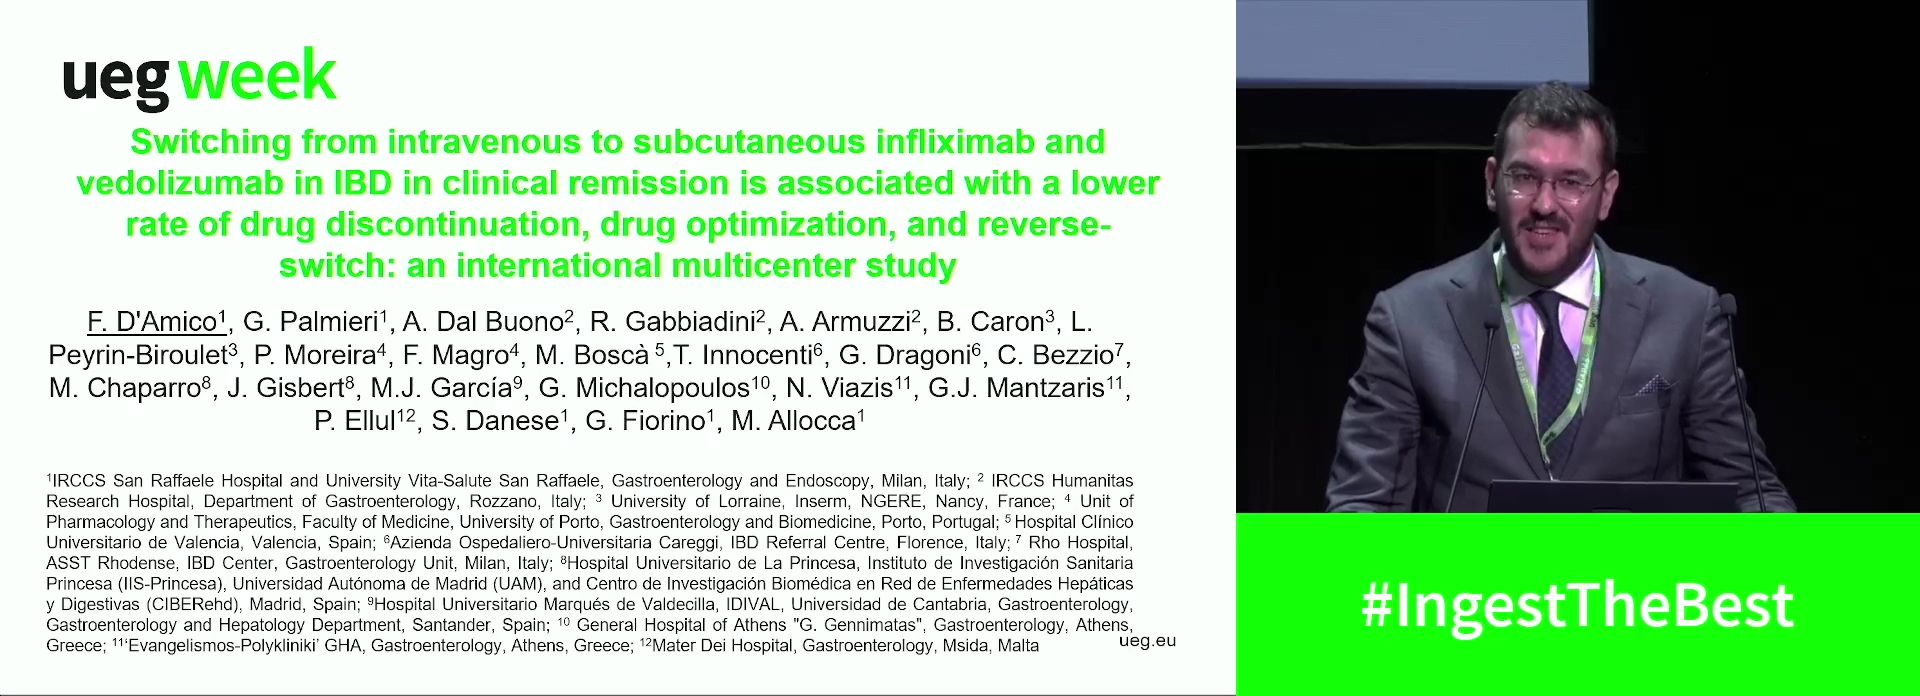 SWITCHING FROM INTRAVENOUS TO SUBCUTANEOUS INFLIXIMAB AND VEDOLIZUMAB IN IBD IN CLINICAL REMISSION IS ASSOCIATED WITH A LOWER RATE OF DRUG DISCONTINUATION, DRUG OPTIMIZATION, AND REVERSE-SWITCH: AN INTERNATIONAL MULTICENTER STUDY